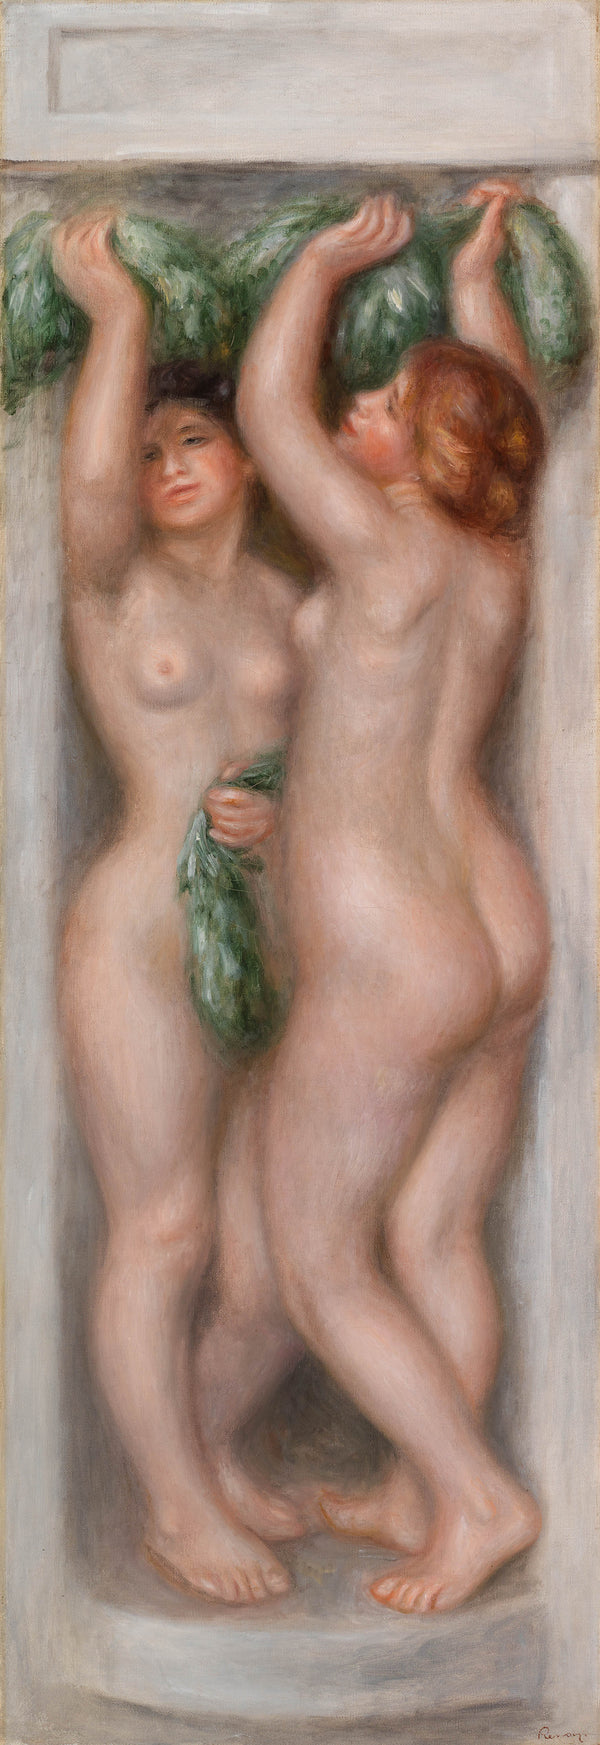 pierre-auguste-renoir-1910-caryatids-cariatides-also-called-two-bathers-decorative-panel-art-print-fine-art-reproduction-wall-art-id-atd08lwr7